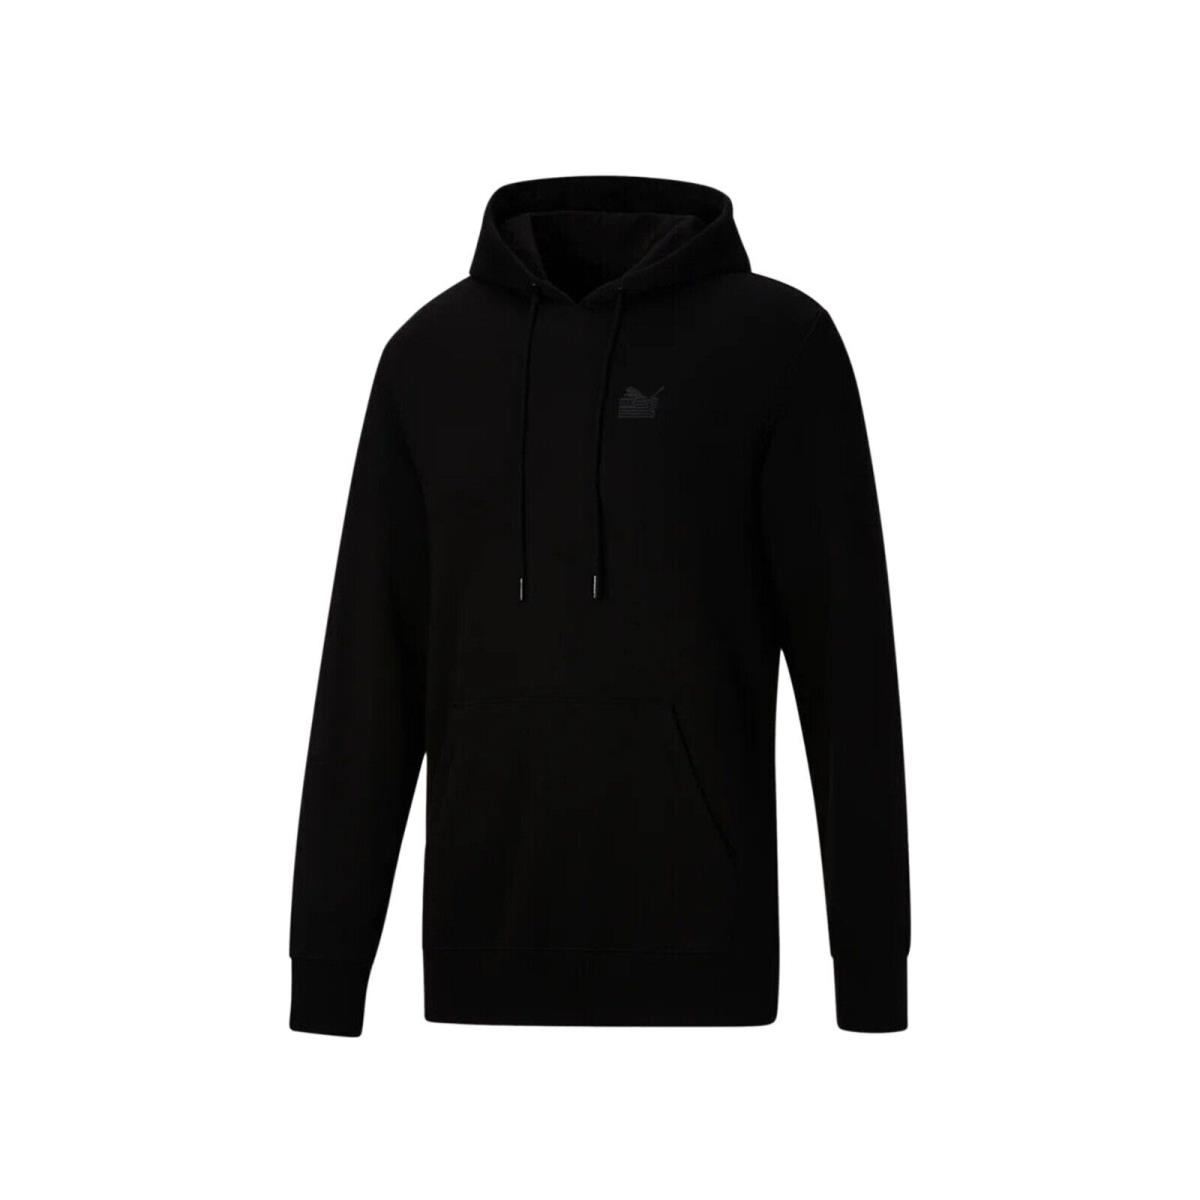 Puma x Tmc Every Day Hussle Black Pullover Men`s Hoodie 533684-01